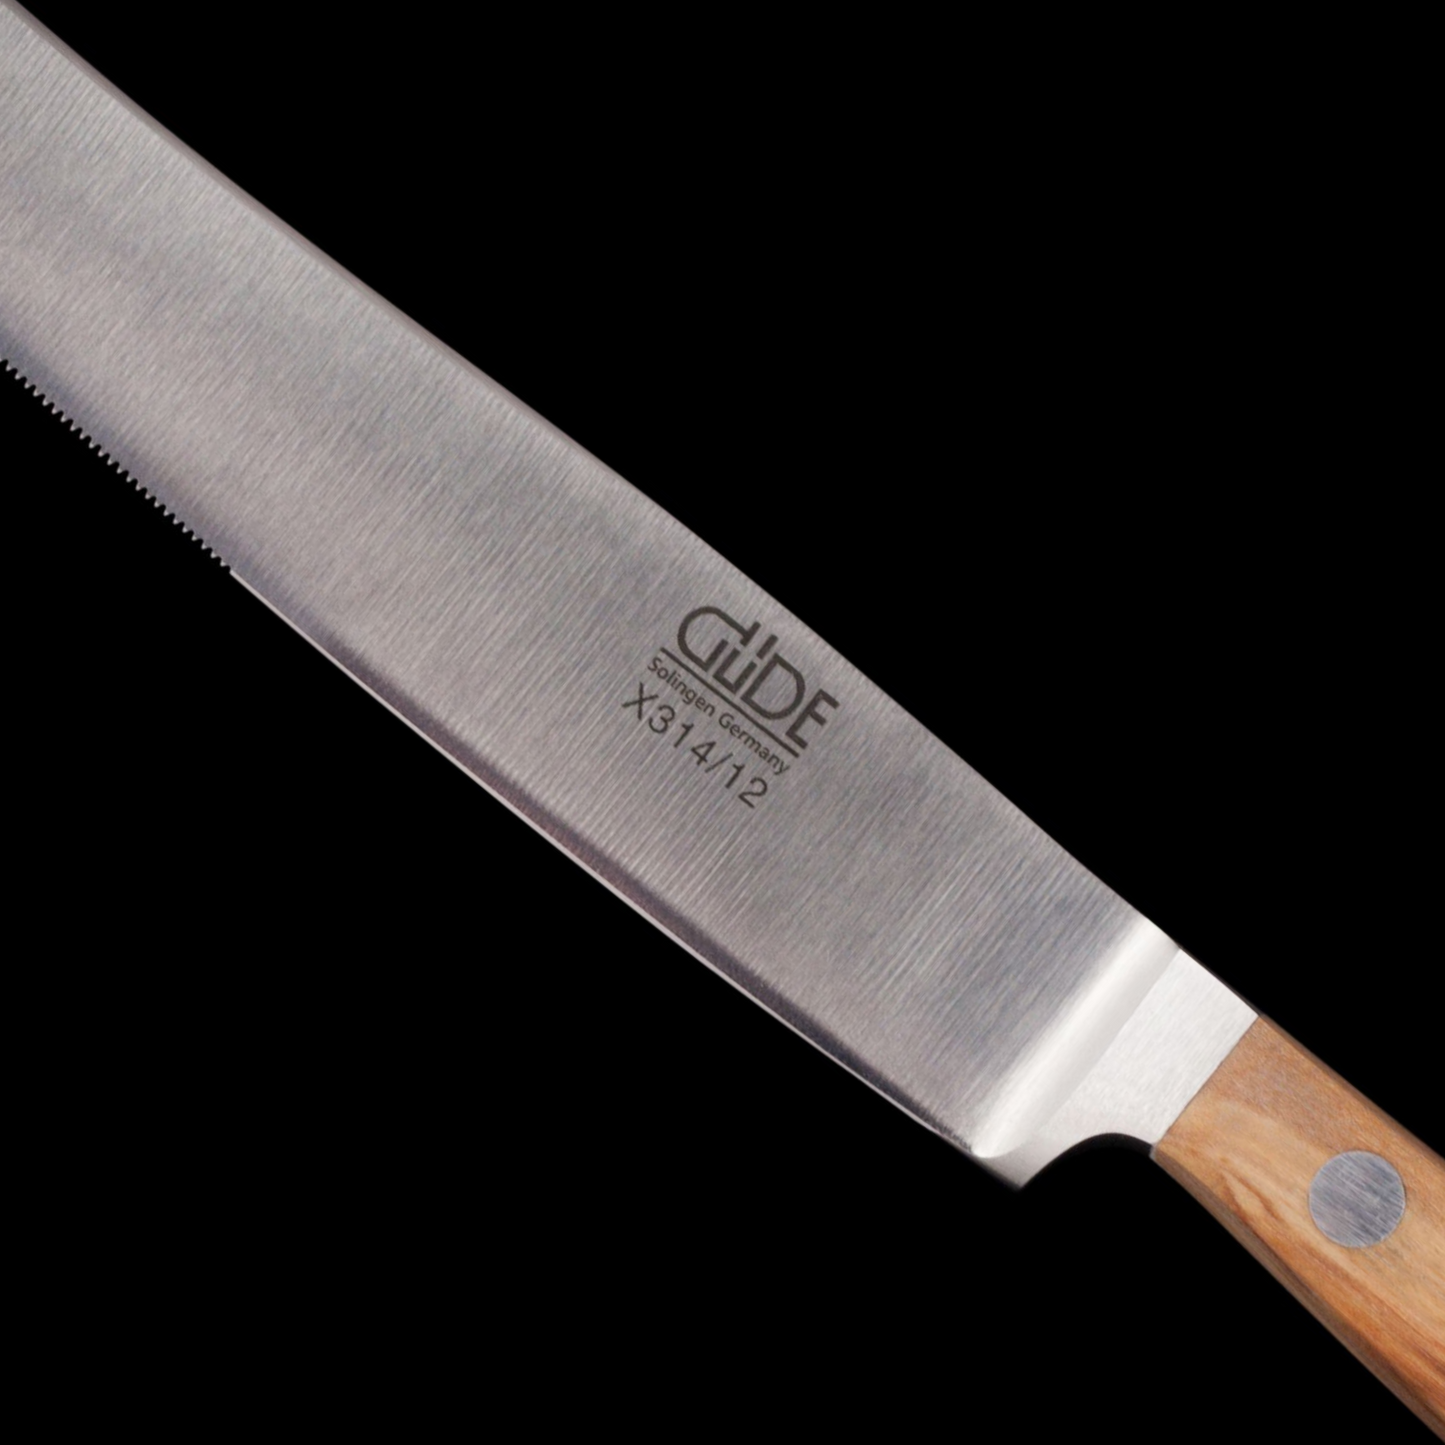 Gude Alpha Olive Series Forged Double Bolster Steak Knife 4 1/2",Olivewood Handle and Serrated Blade - GuedeUSA